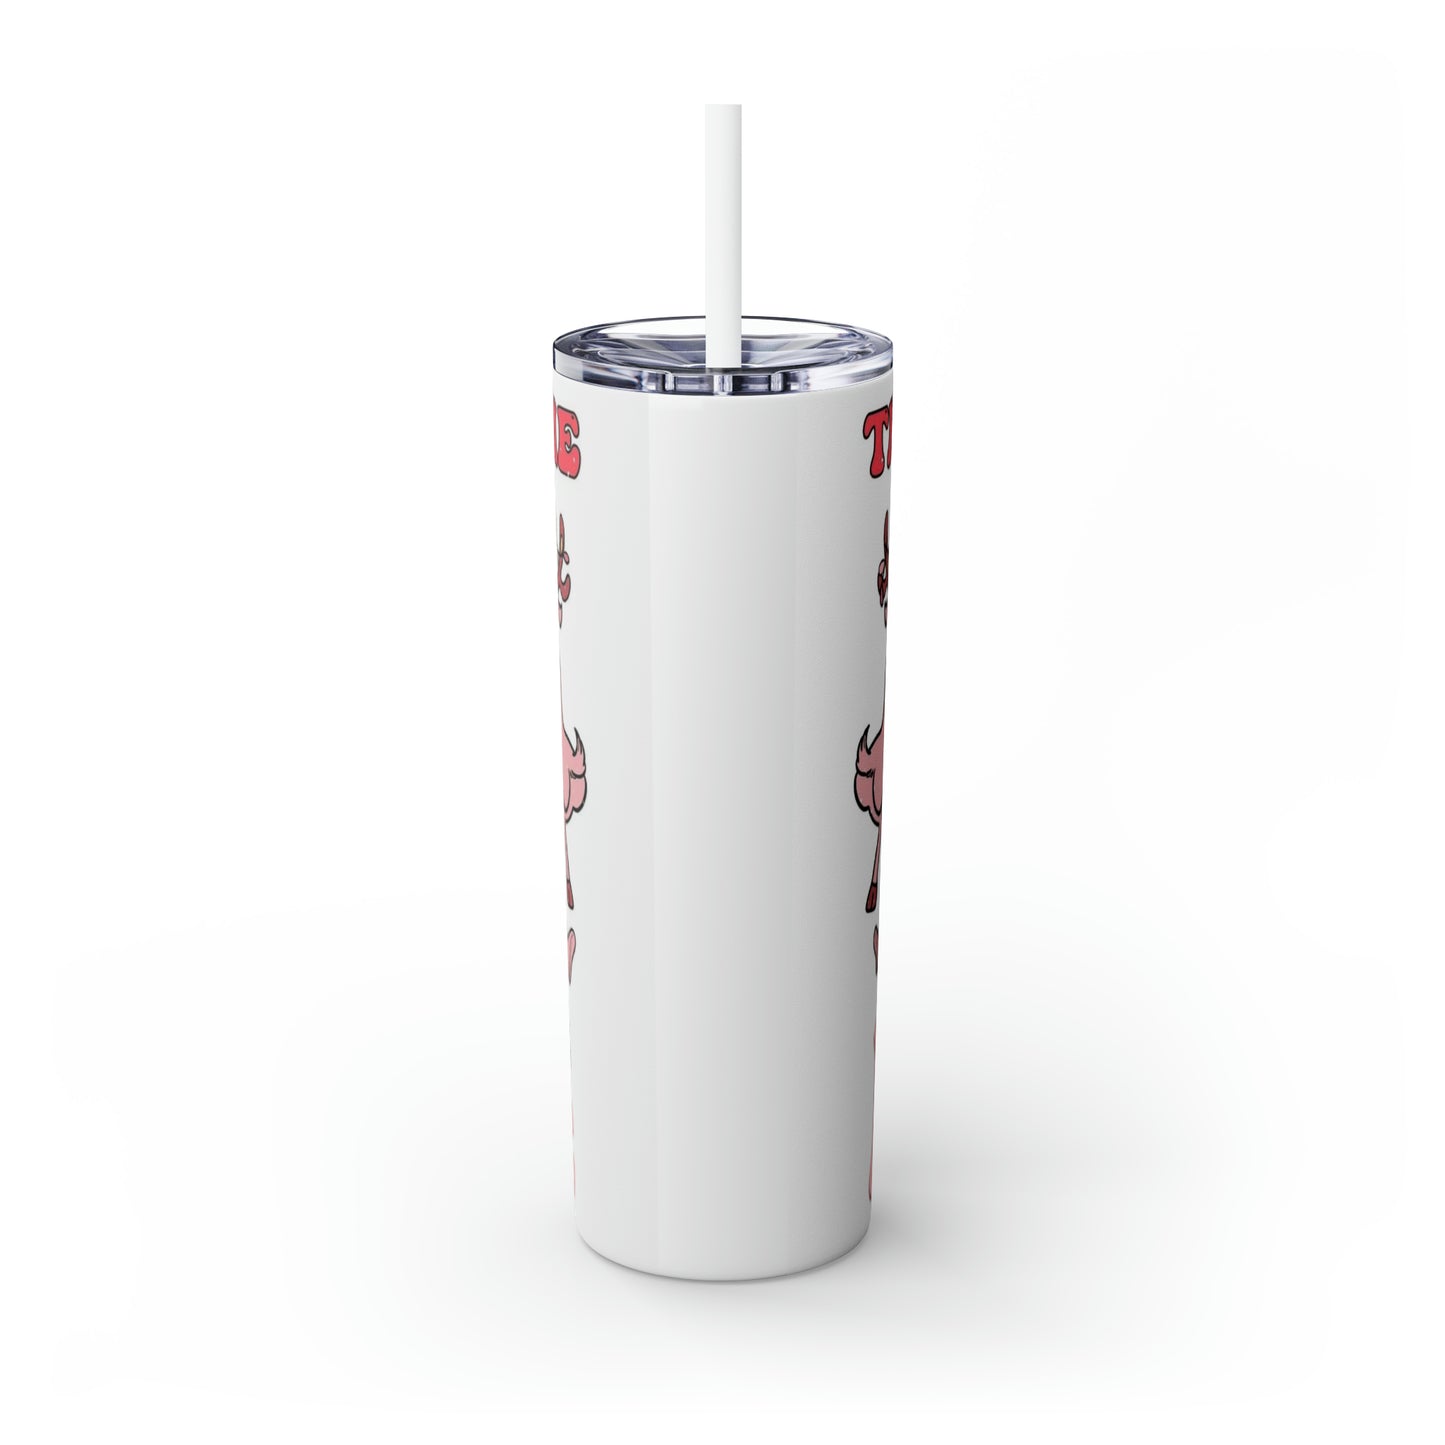 There’s Some Hoes In This House Santa Skinny Tumbler with Straw, 20oz